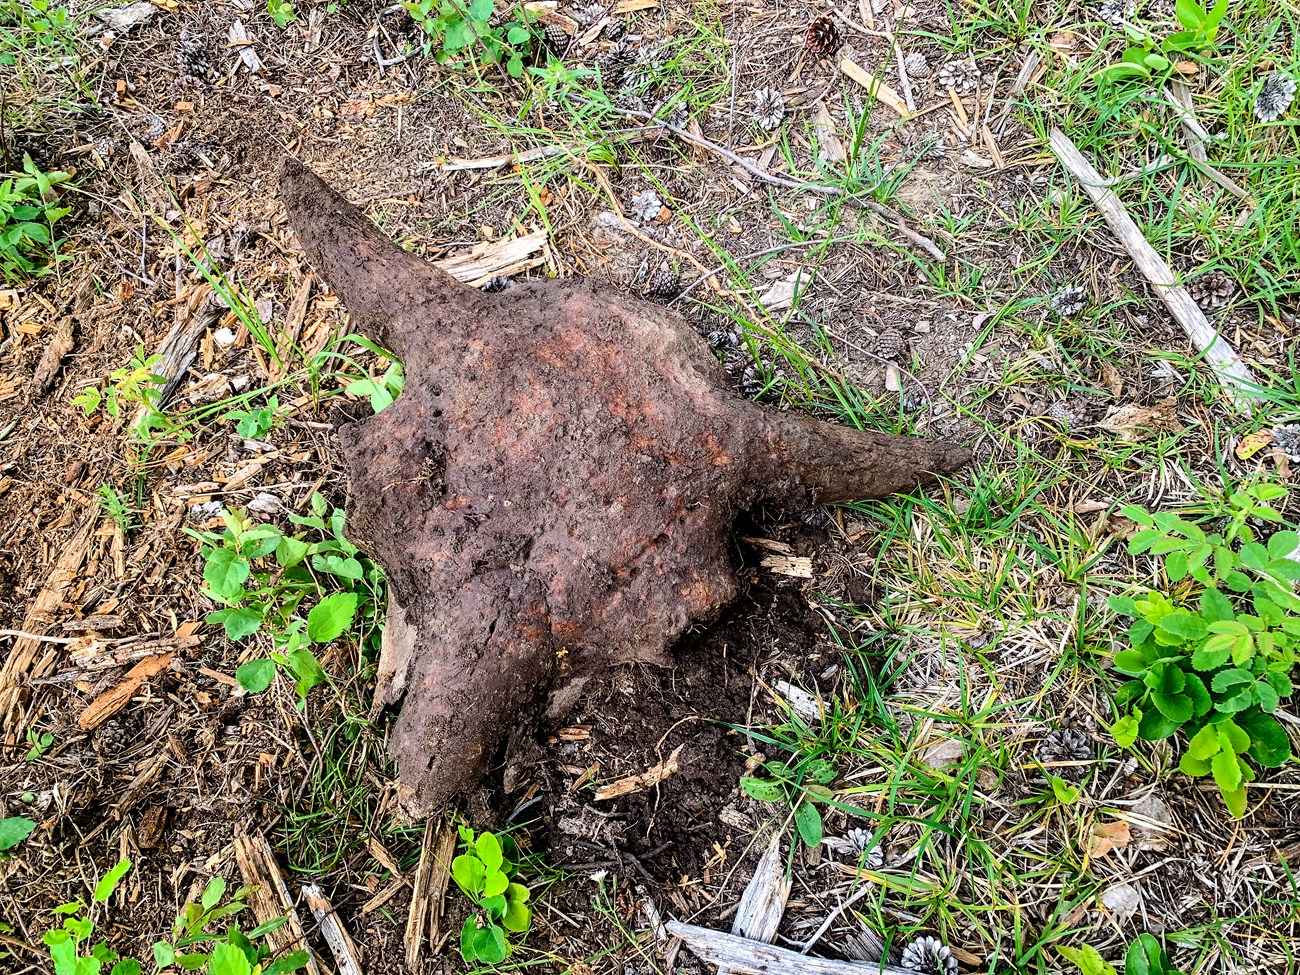 A dirt-covered bison skull sits on green grass.